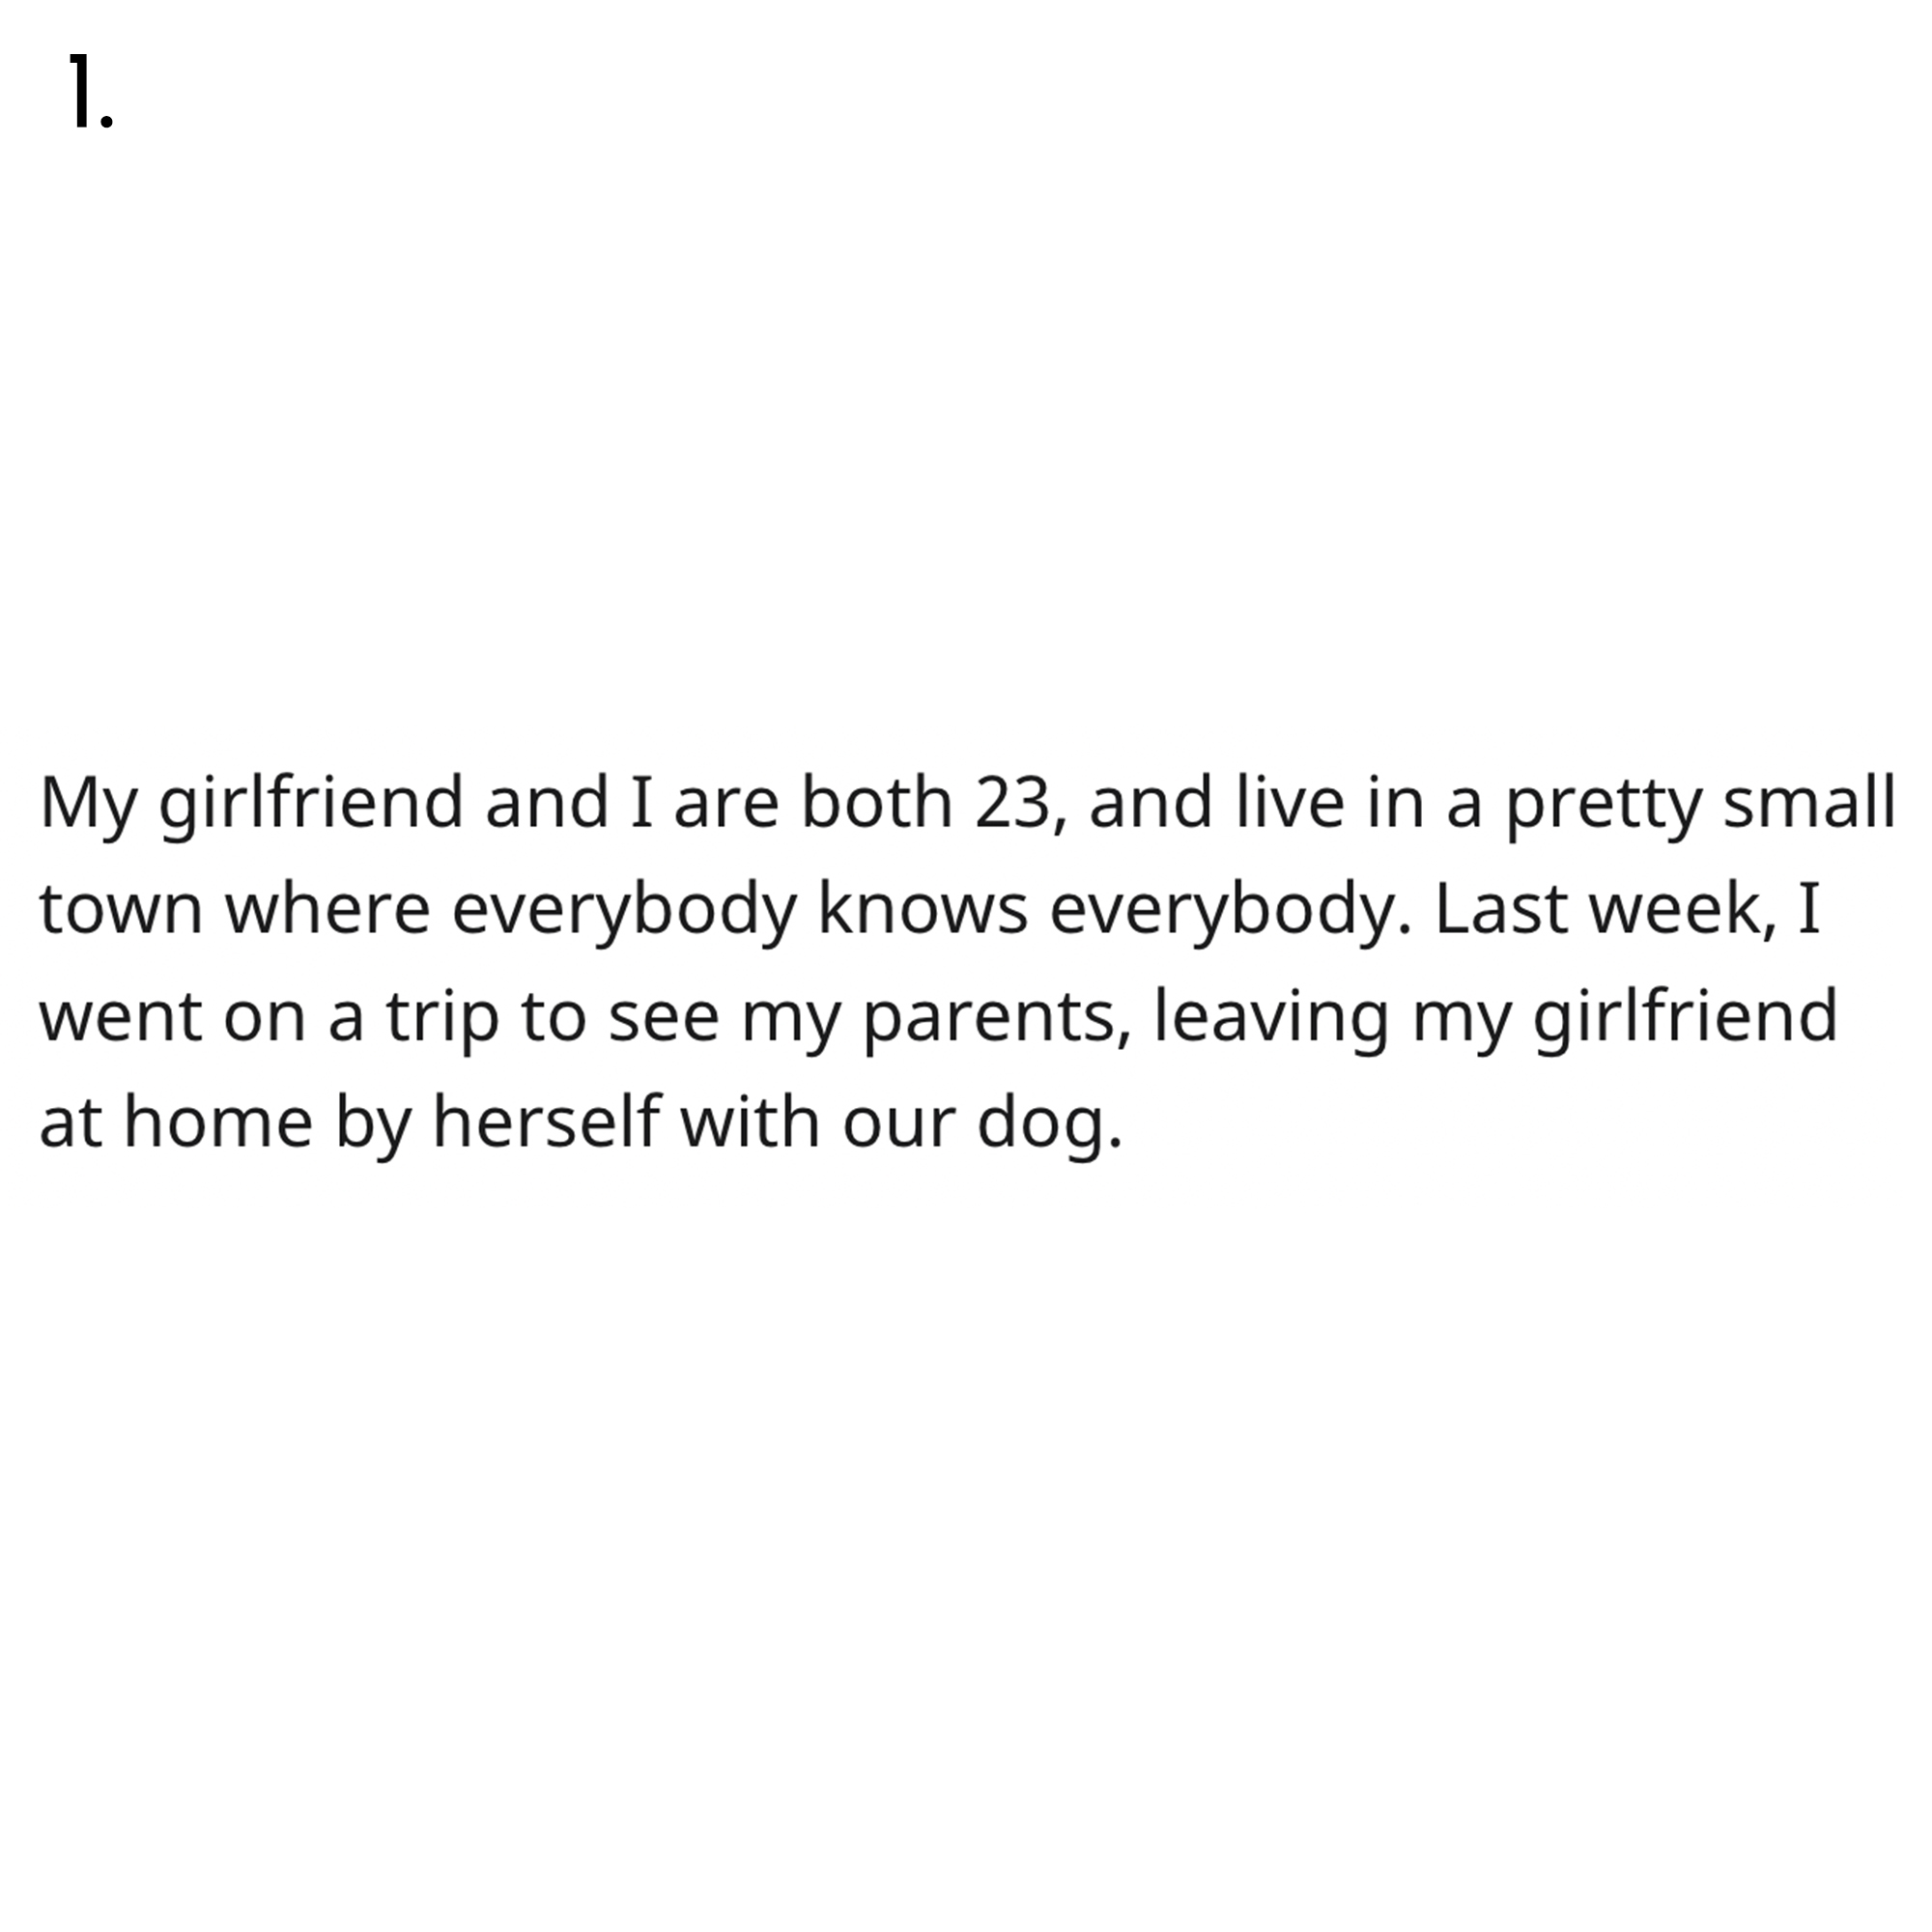 AITA Reddit Story - 1. My girlfriend and I are both 23, and live in a pretty small town where everybody knows everybody. Last week, I went on a trip to see my parents, leaving my girlfriend at home by herself with our dog.